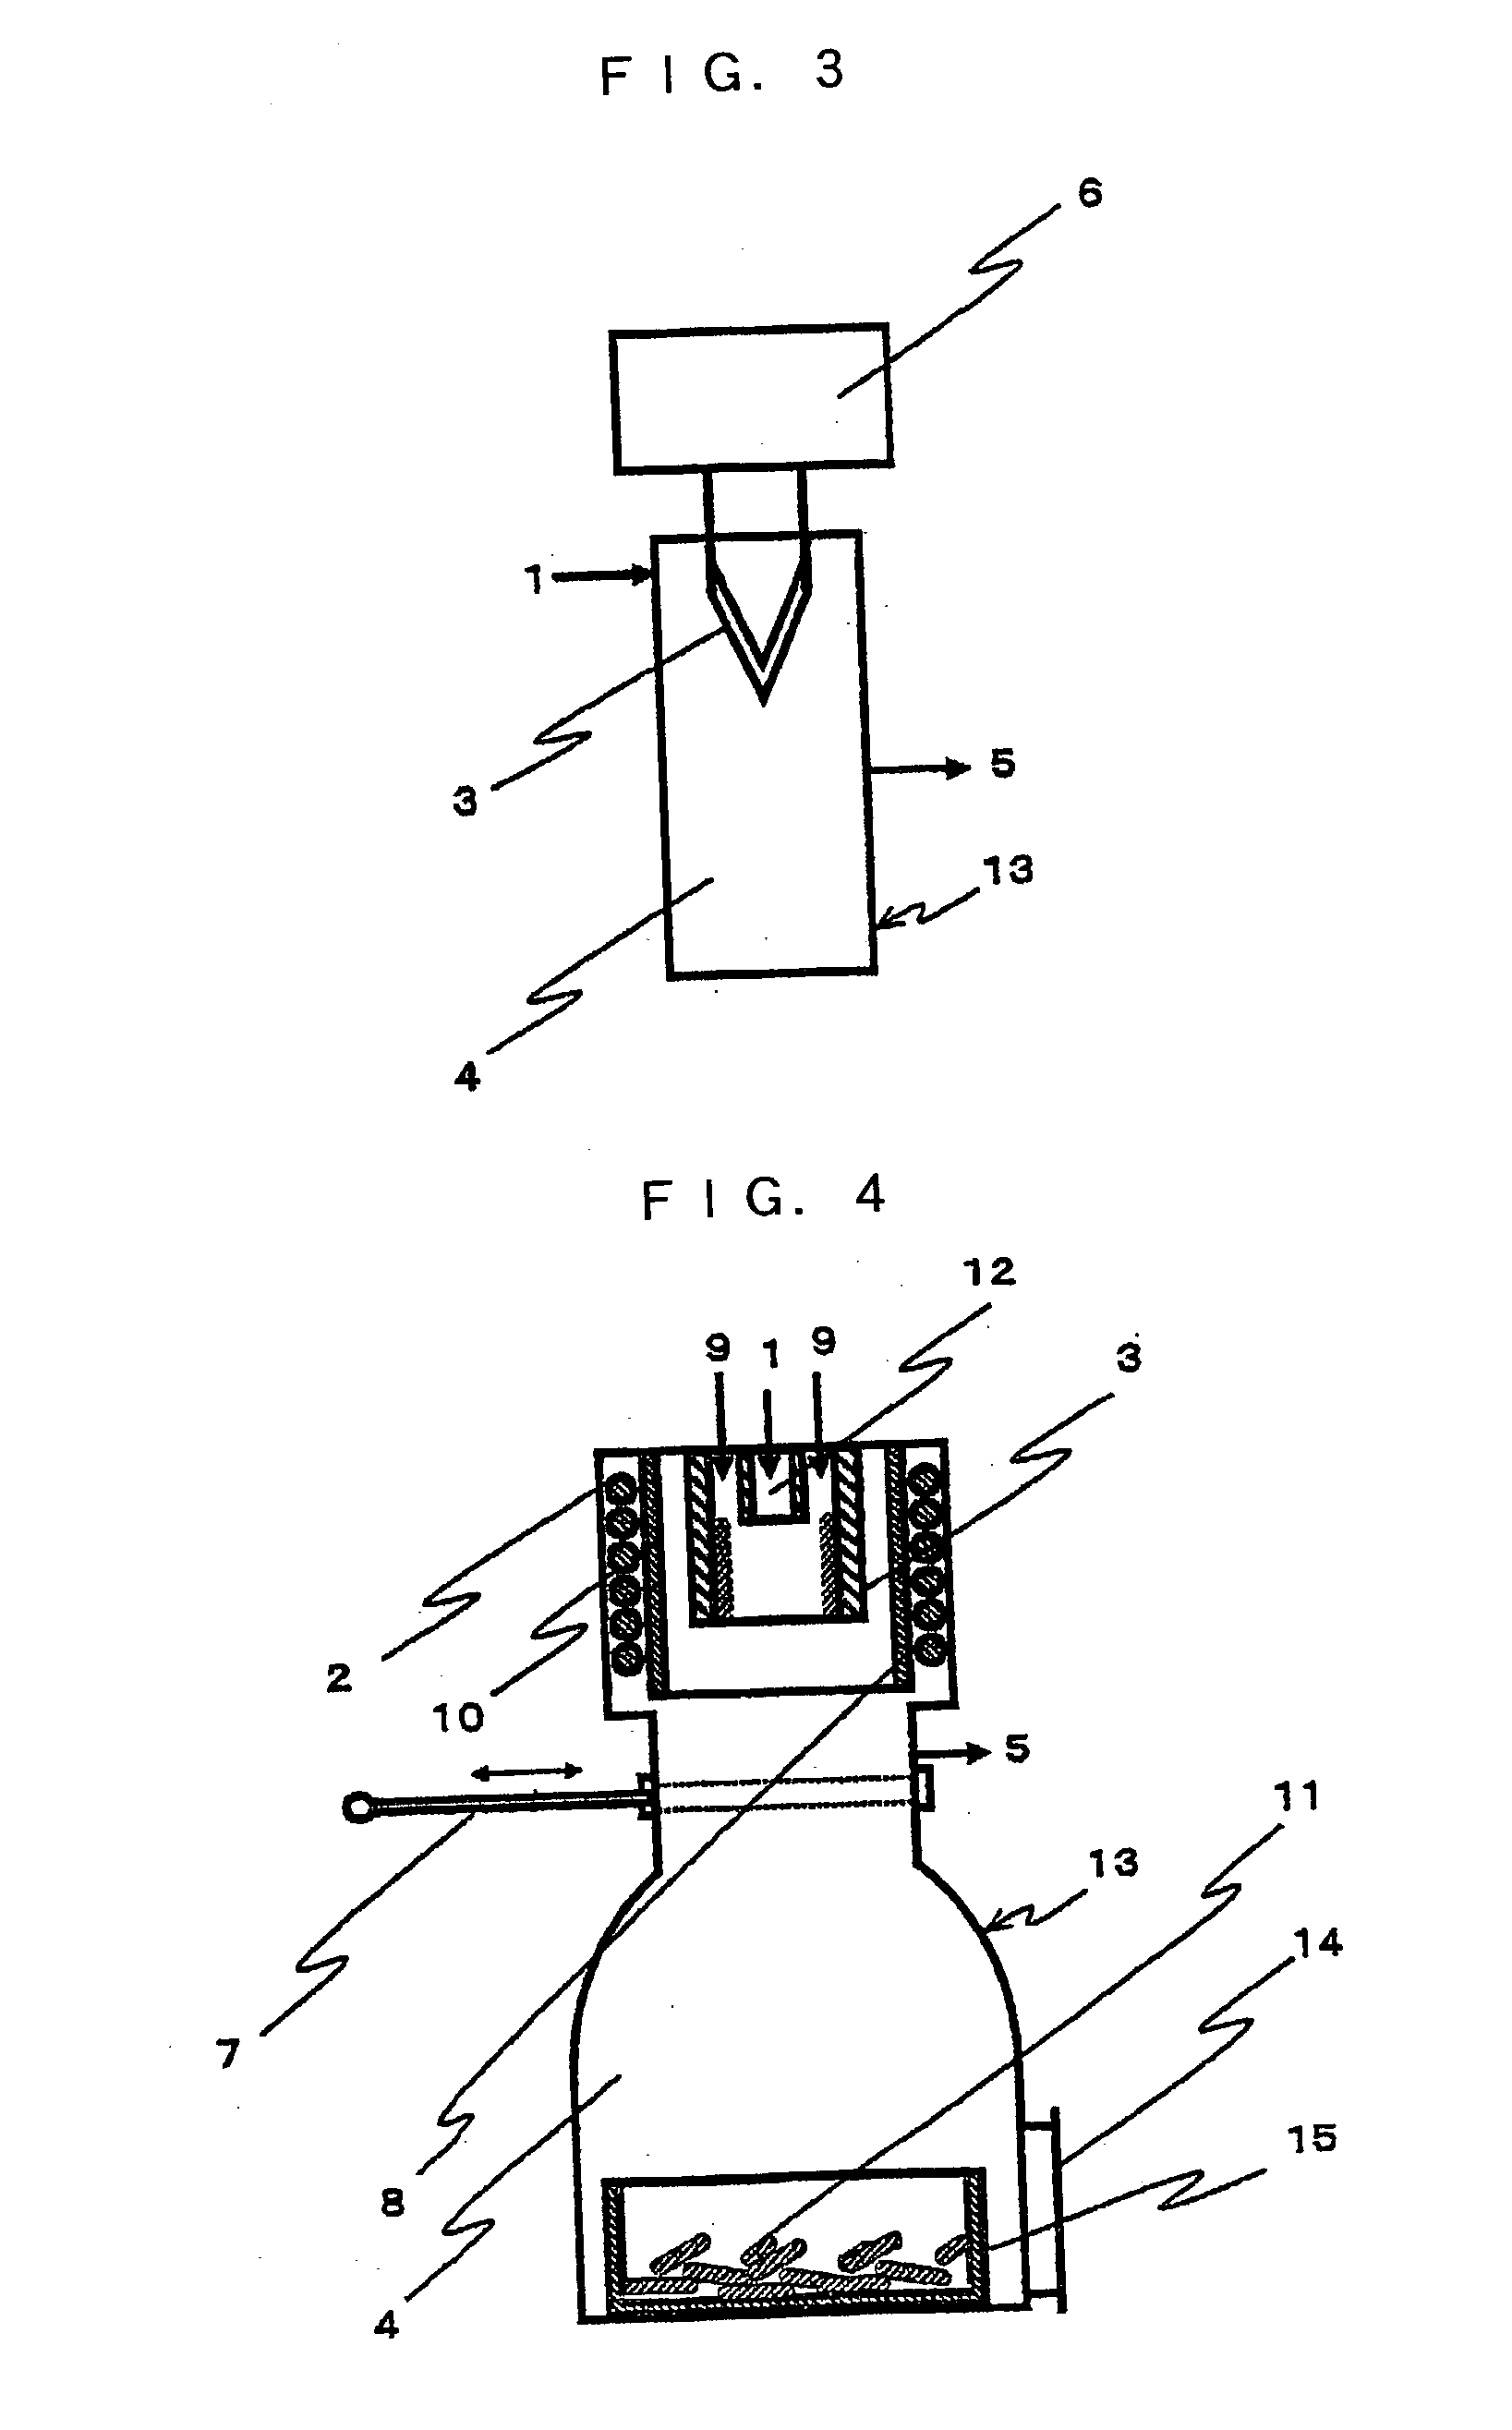 Method of manufacturing silicon